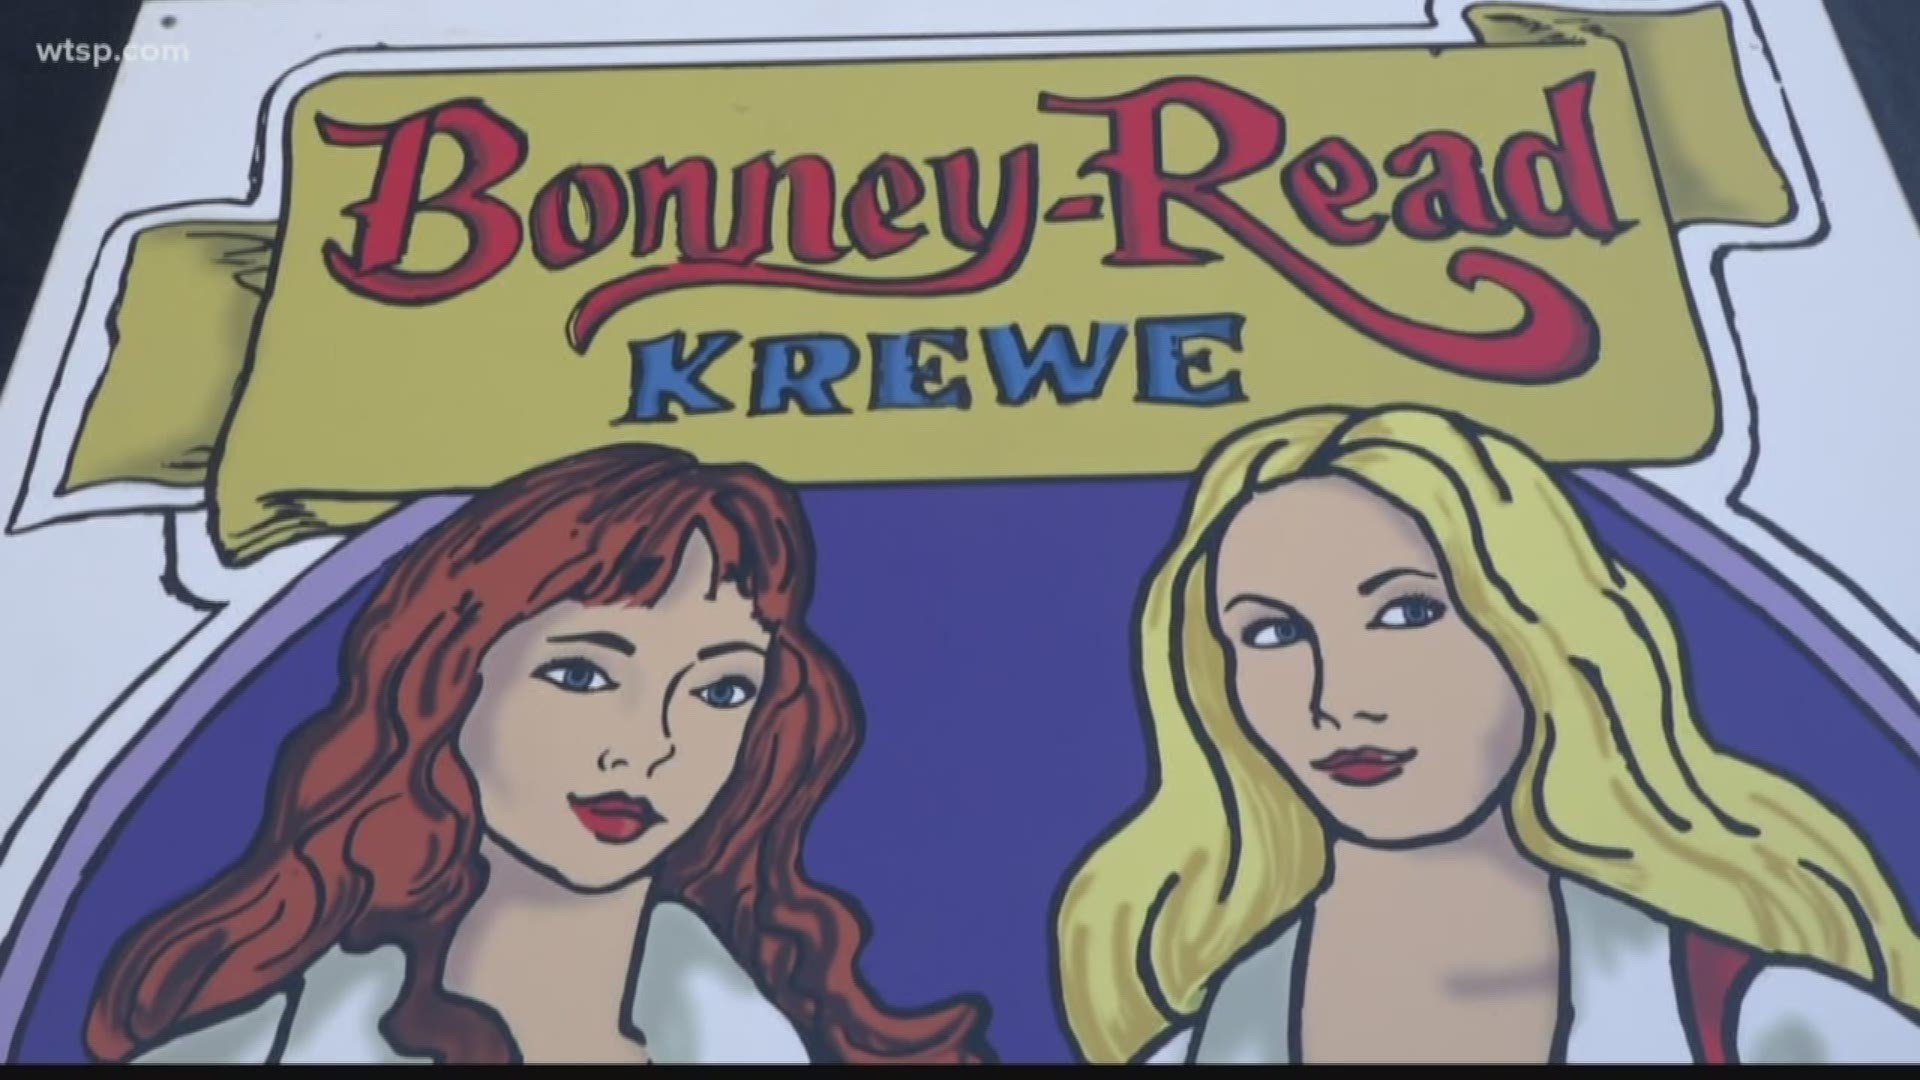 The krewe adopted two skulls and two cross swords as their logo to represent the spirit of Bonny and Read.